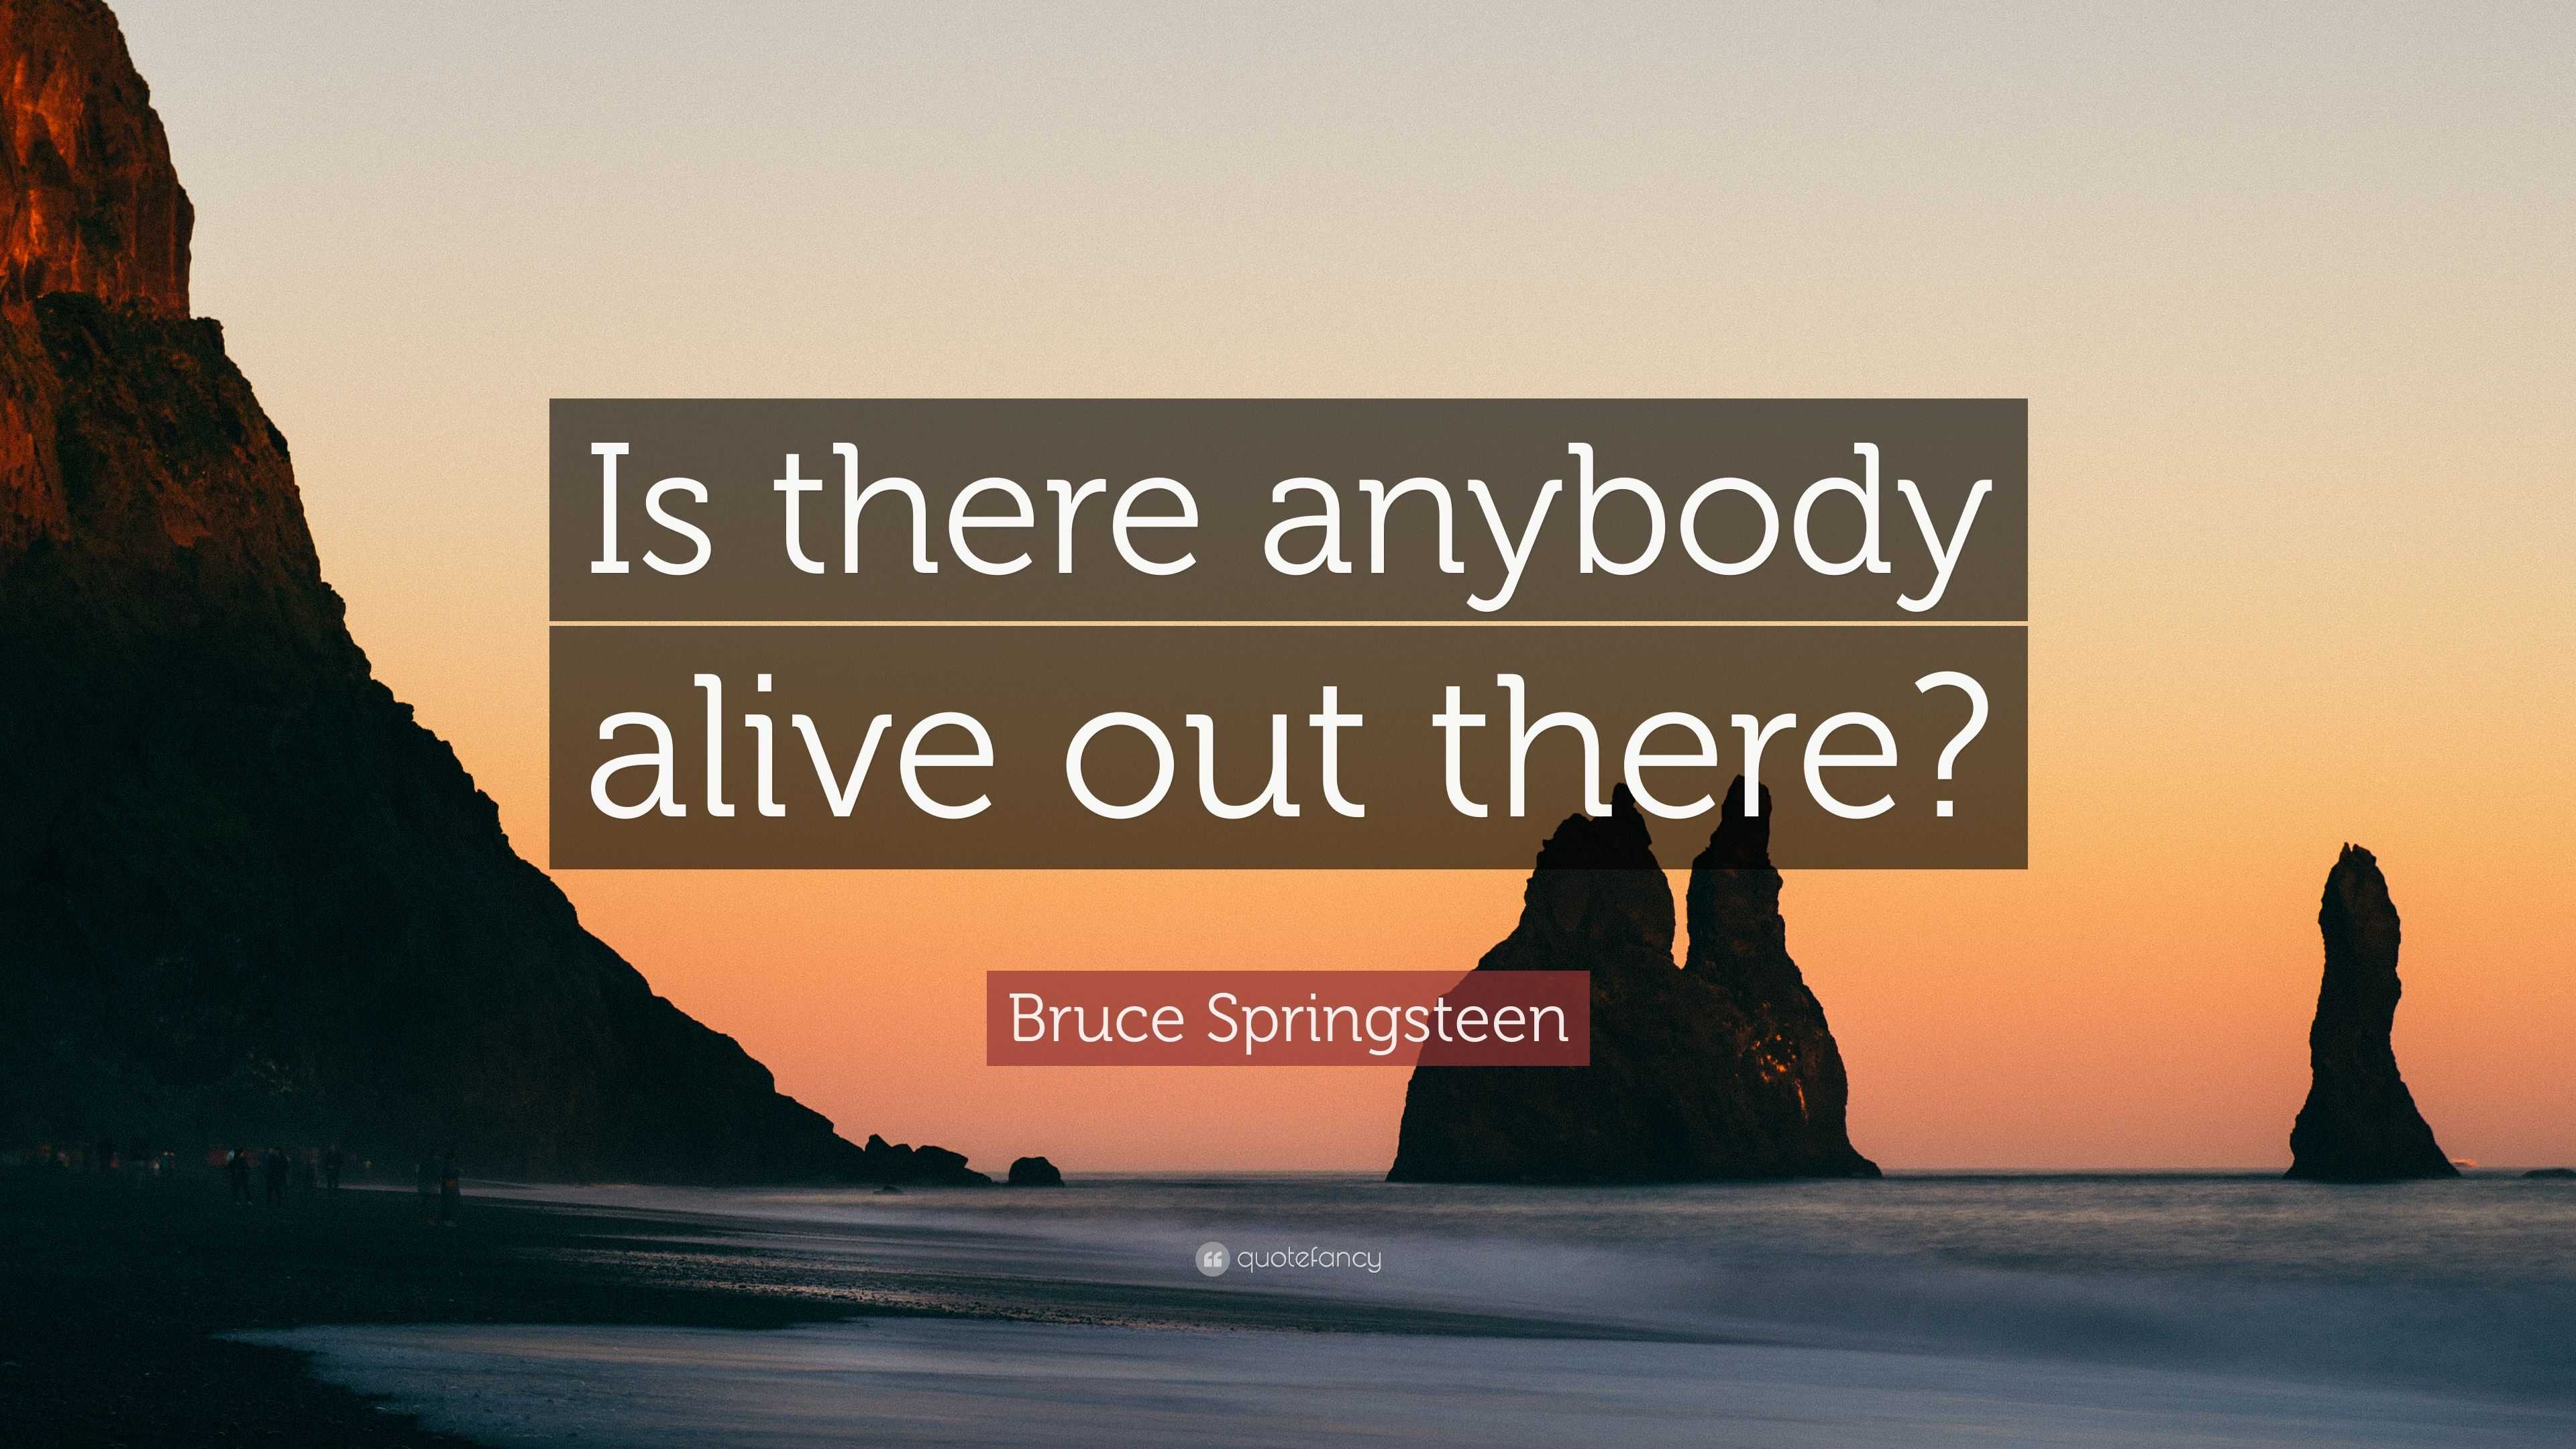 Bruce Springsteen Quote: “Is there anybody alive out there?”